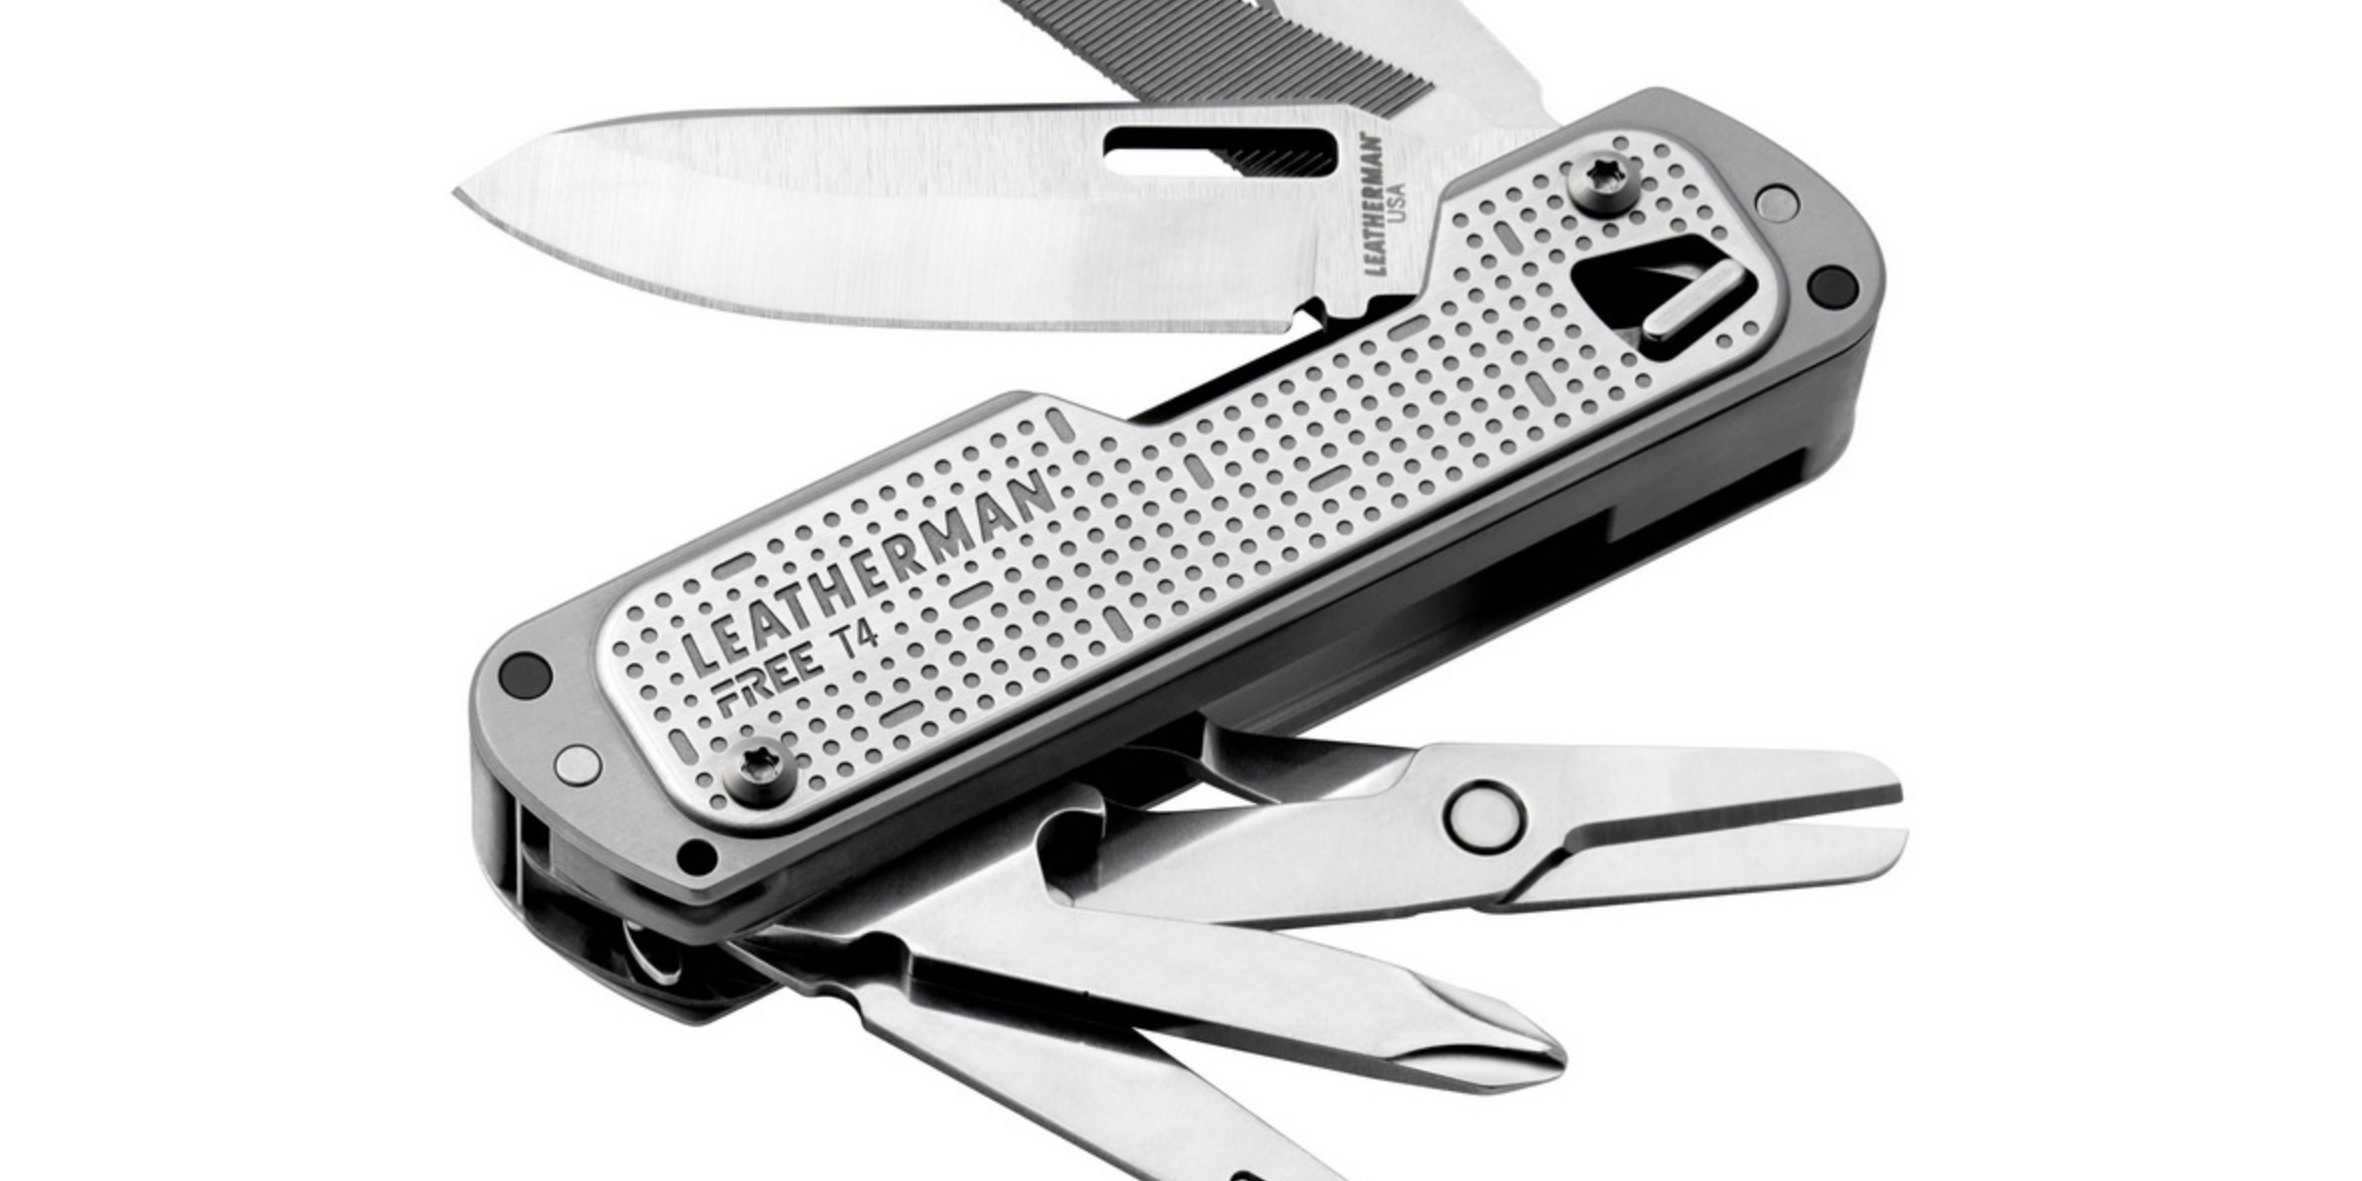 New Leatherman Free lineup is the "future of multitools" 9to5Toys